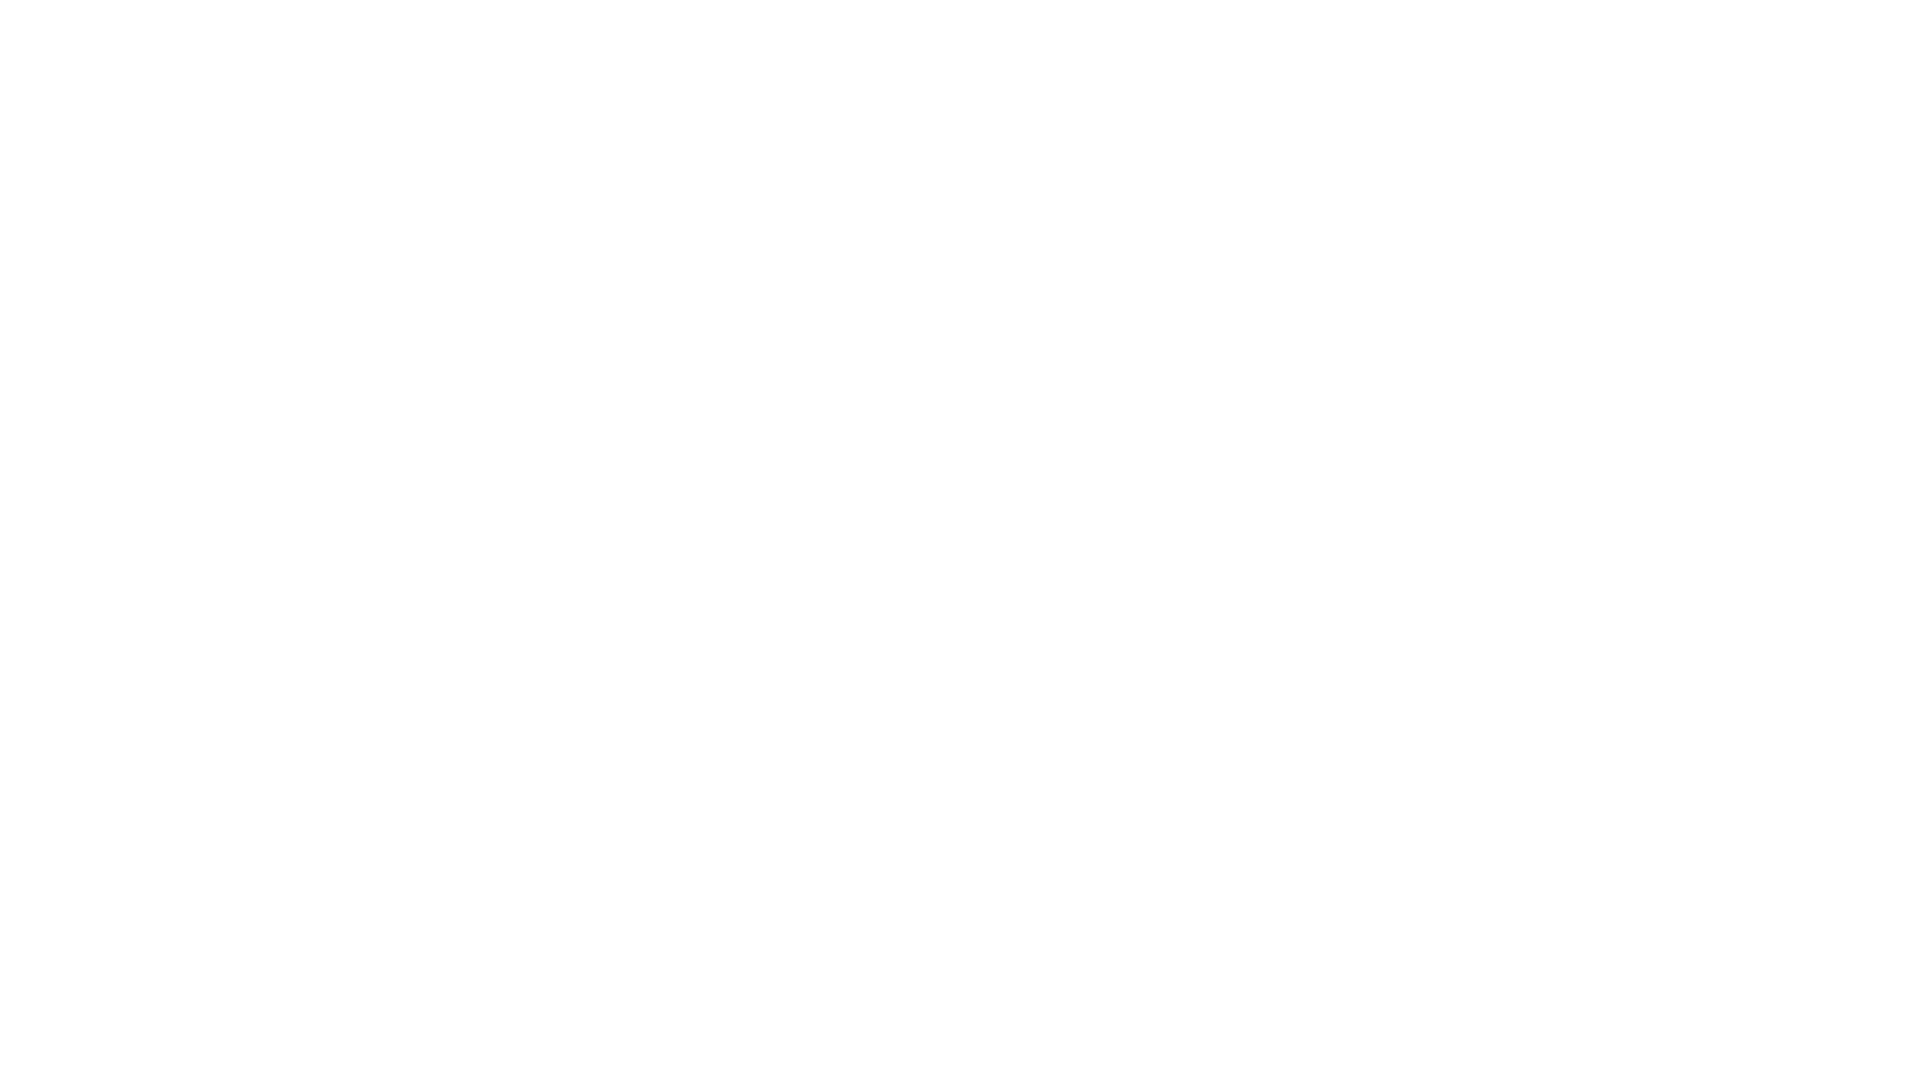 We are located in Shanghai, China.